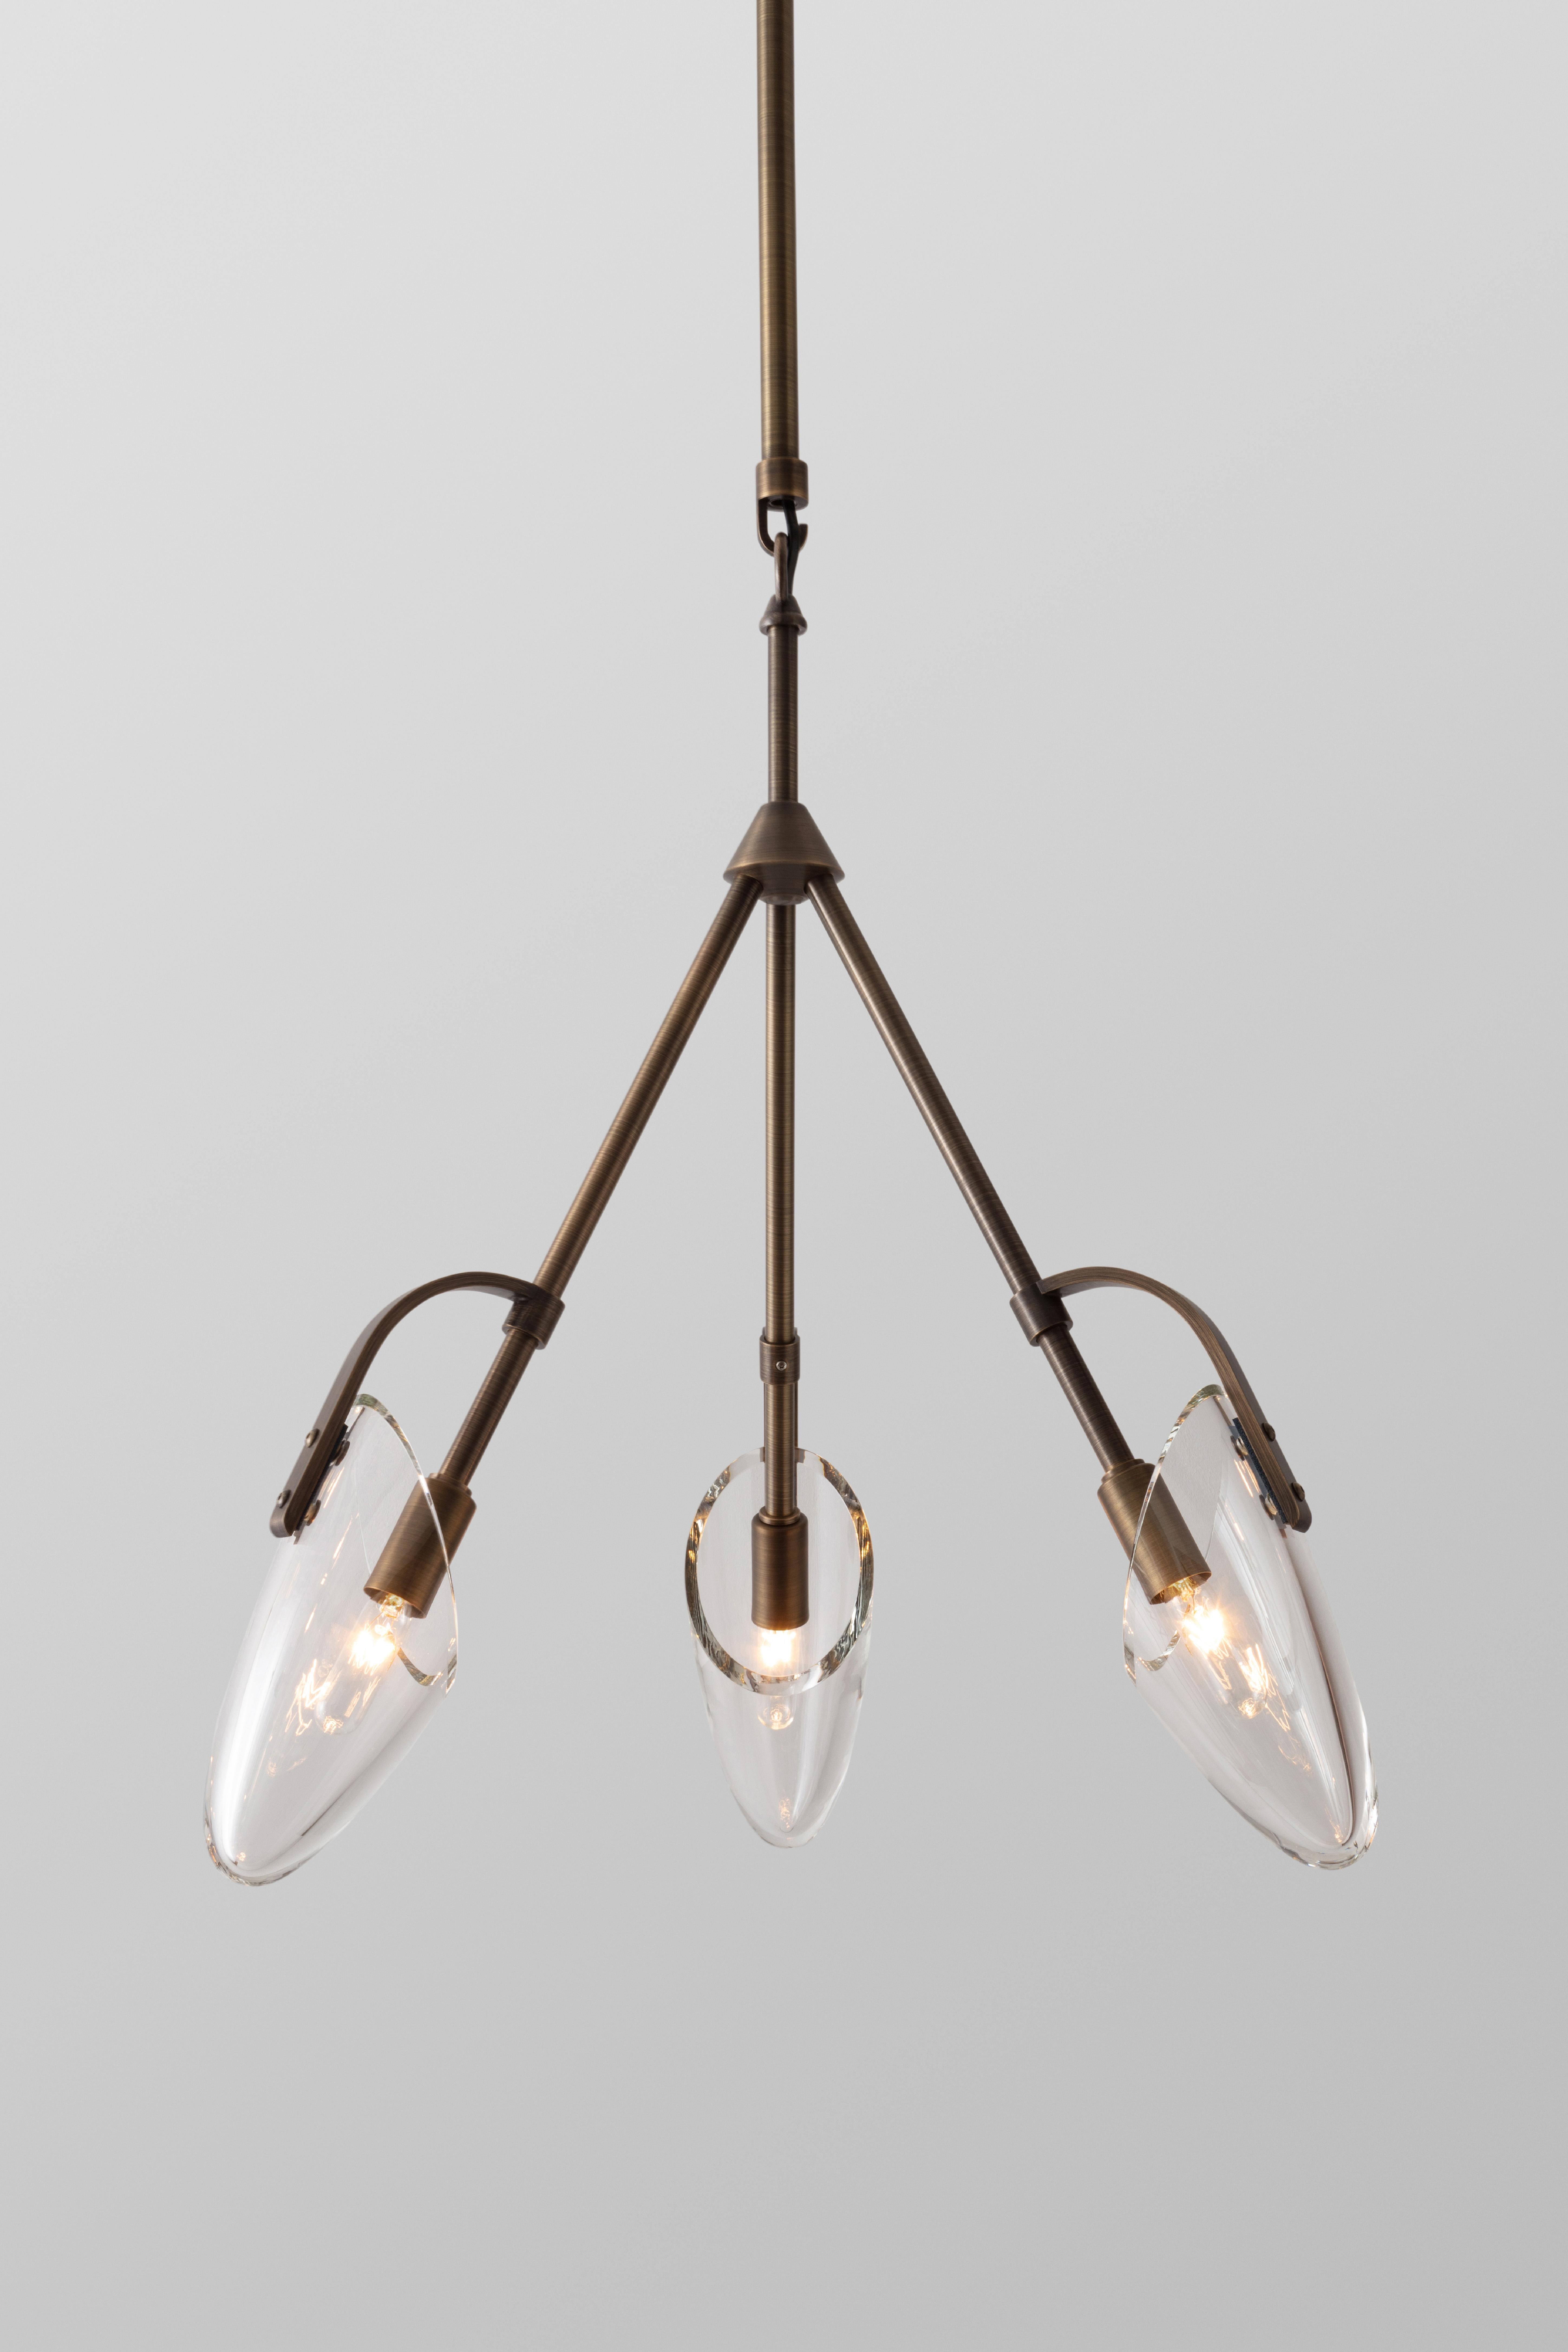 North American Kinesis ‘P.3’ Pendant in Antique Brass by Matthew Fairbank For Sale